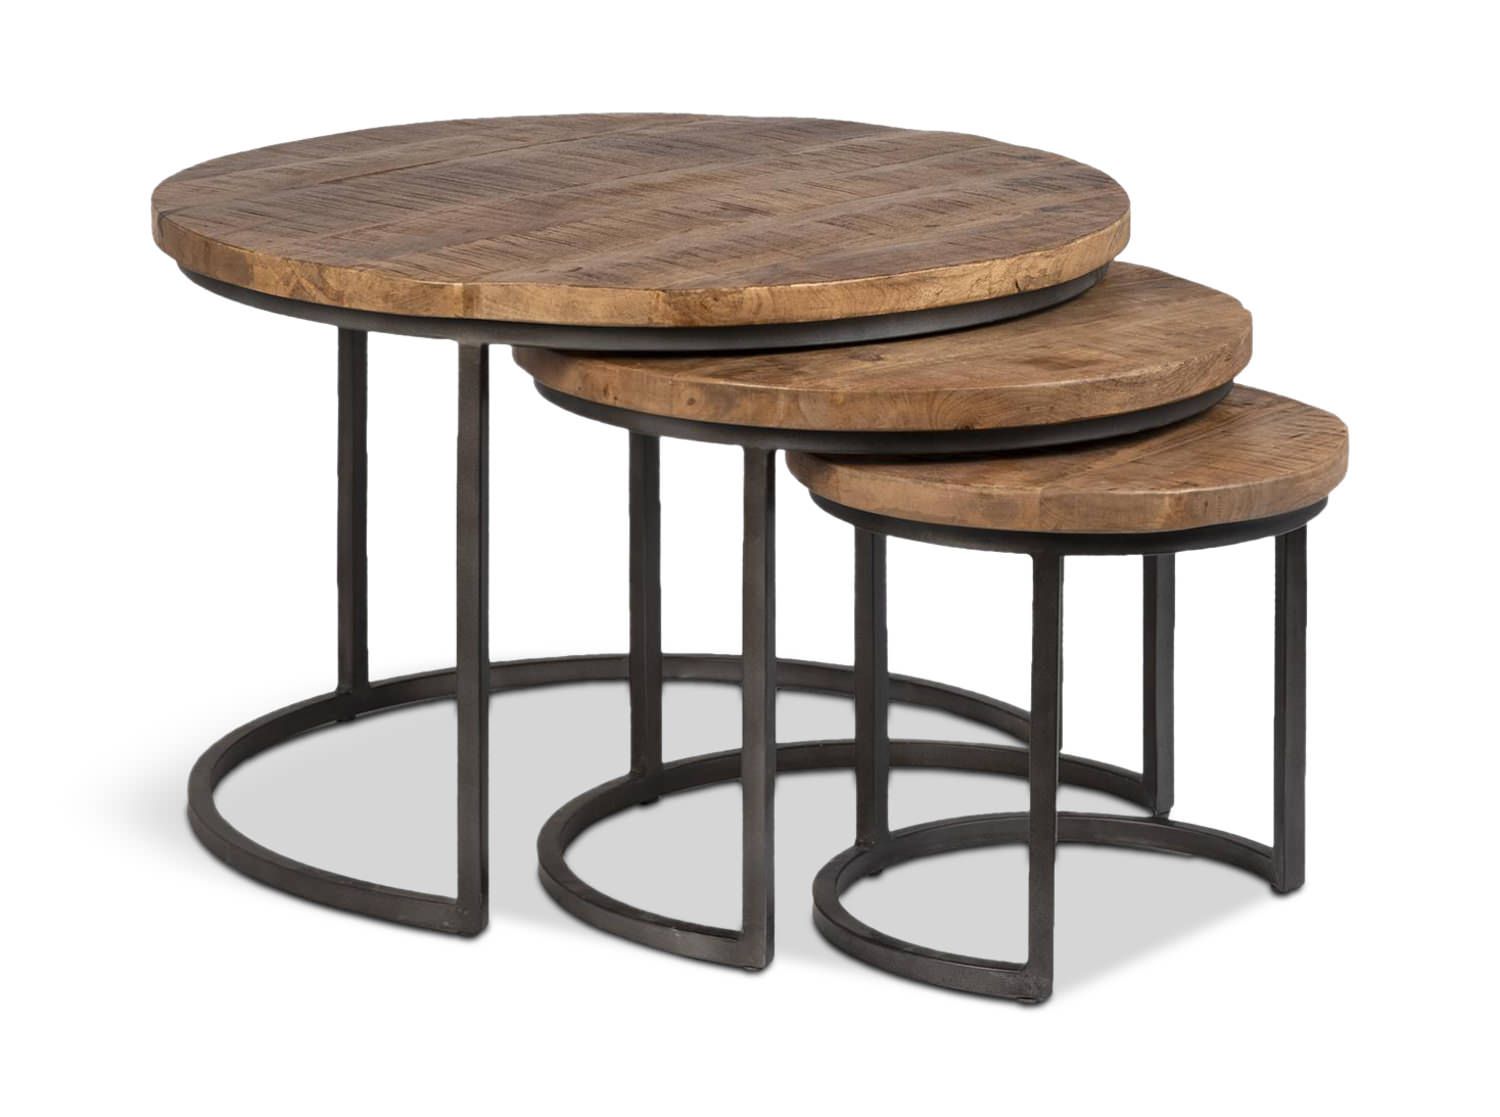 Shelby Nesting Coffee Tables | Hom Furniture Inside Nesting Coffee Tables (View 6 of 15)